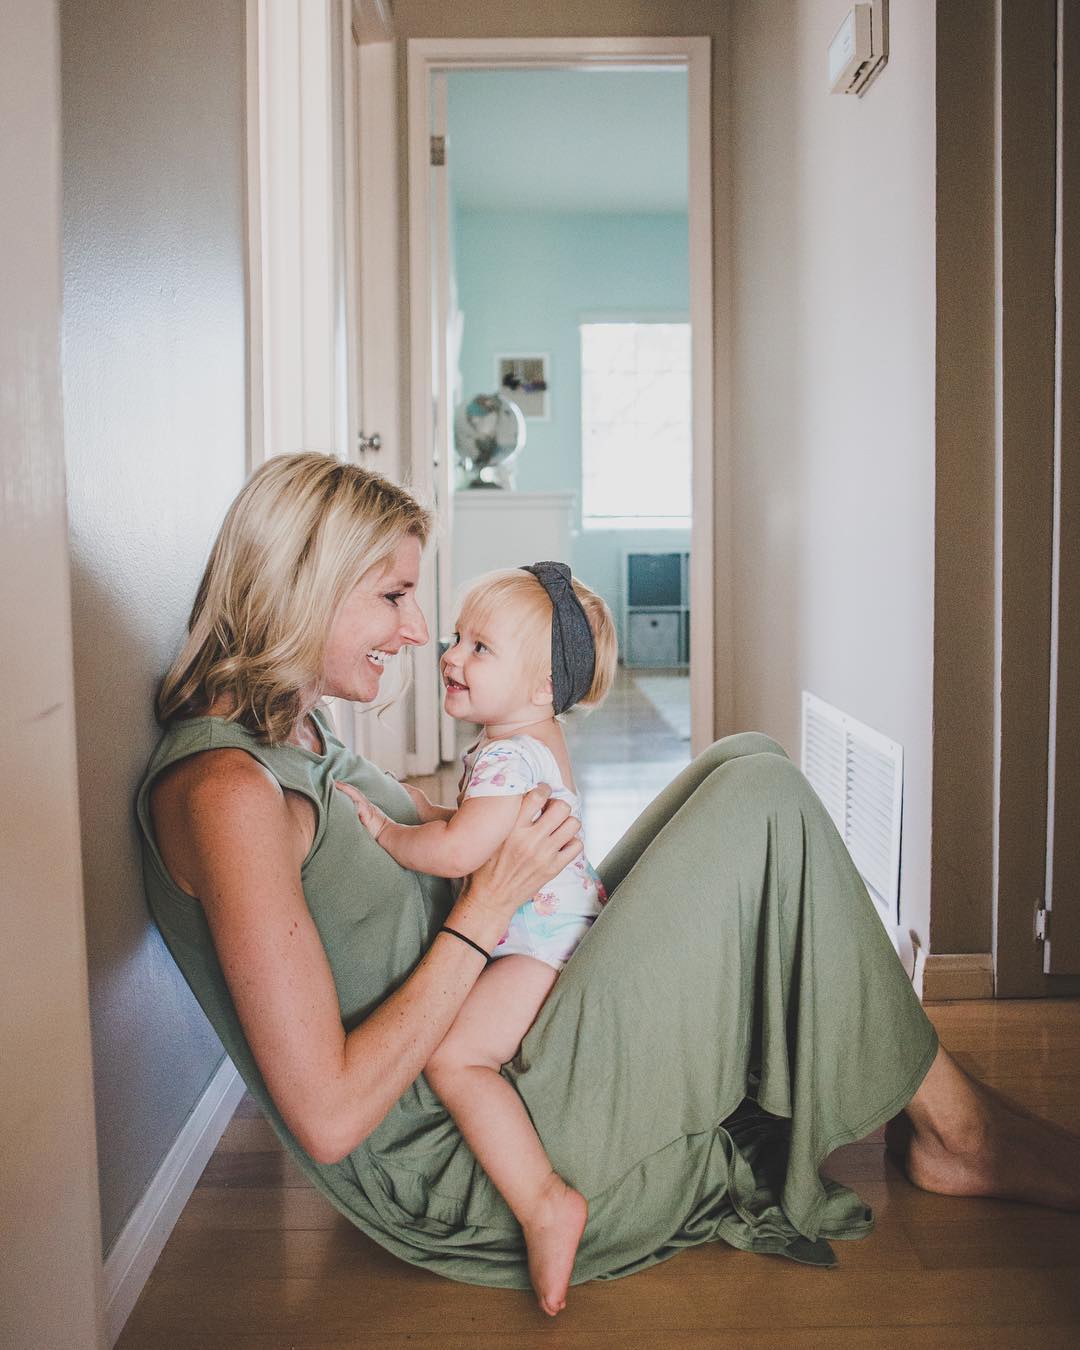 theoverwhelmedmommy | Our Favorite Mom & Baby Photos | Baby Aspen